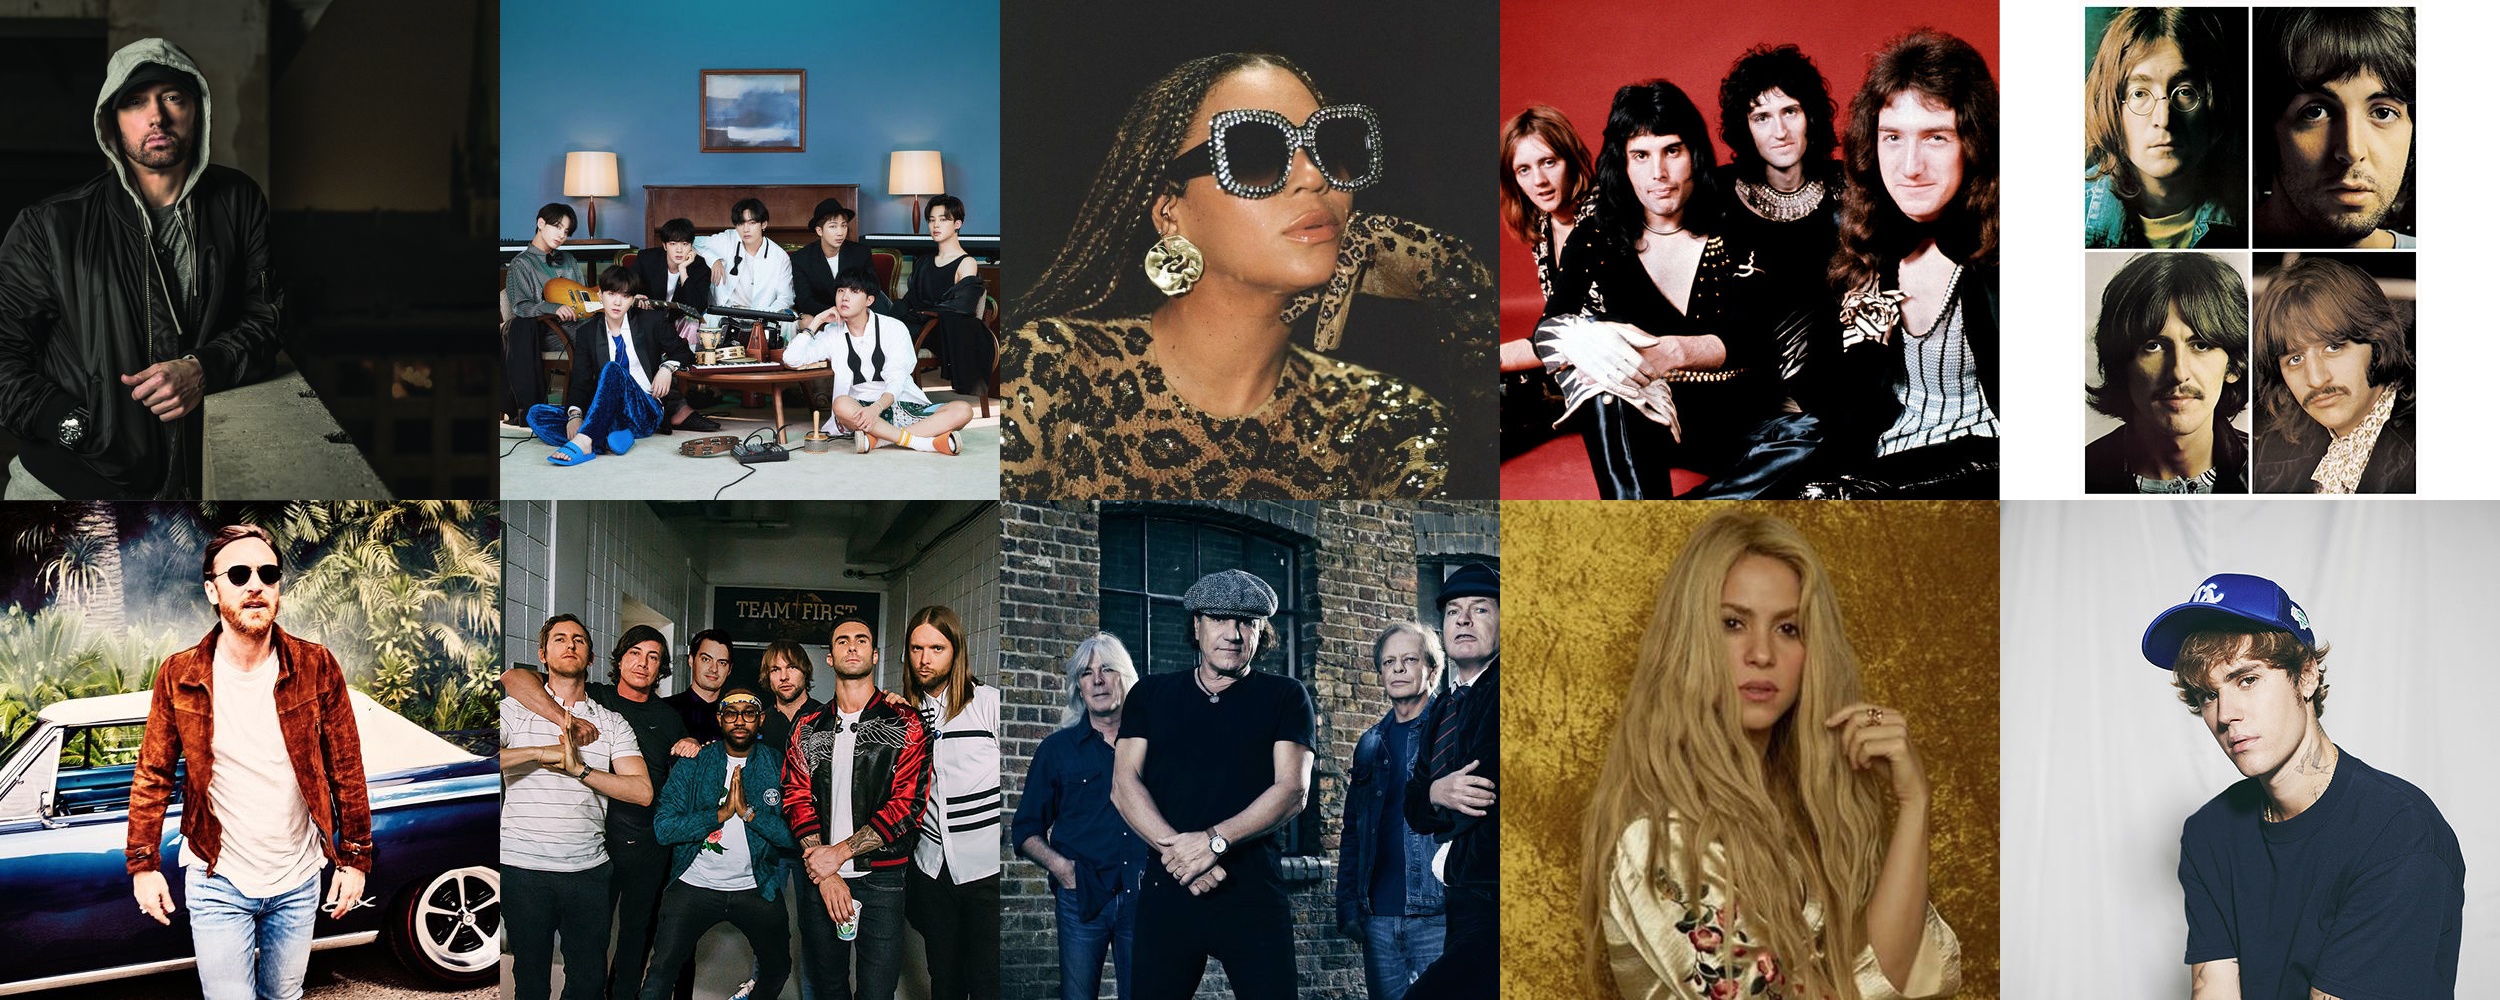 Top 10 artists with the most Superfans on Deezer in 2020 - RouteNote Blog